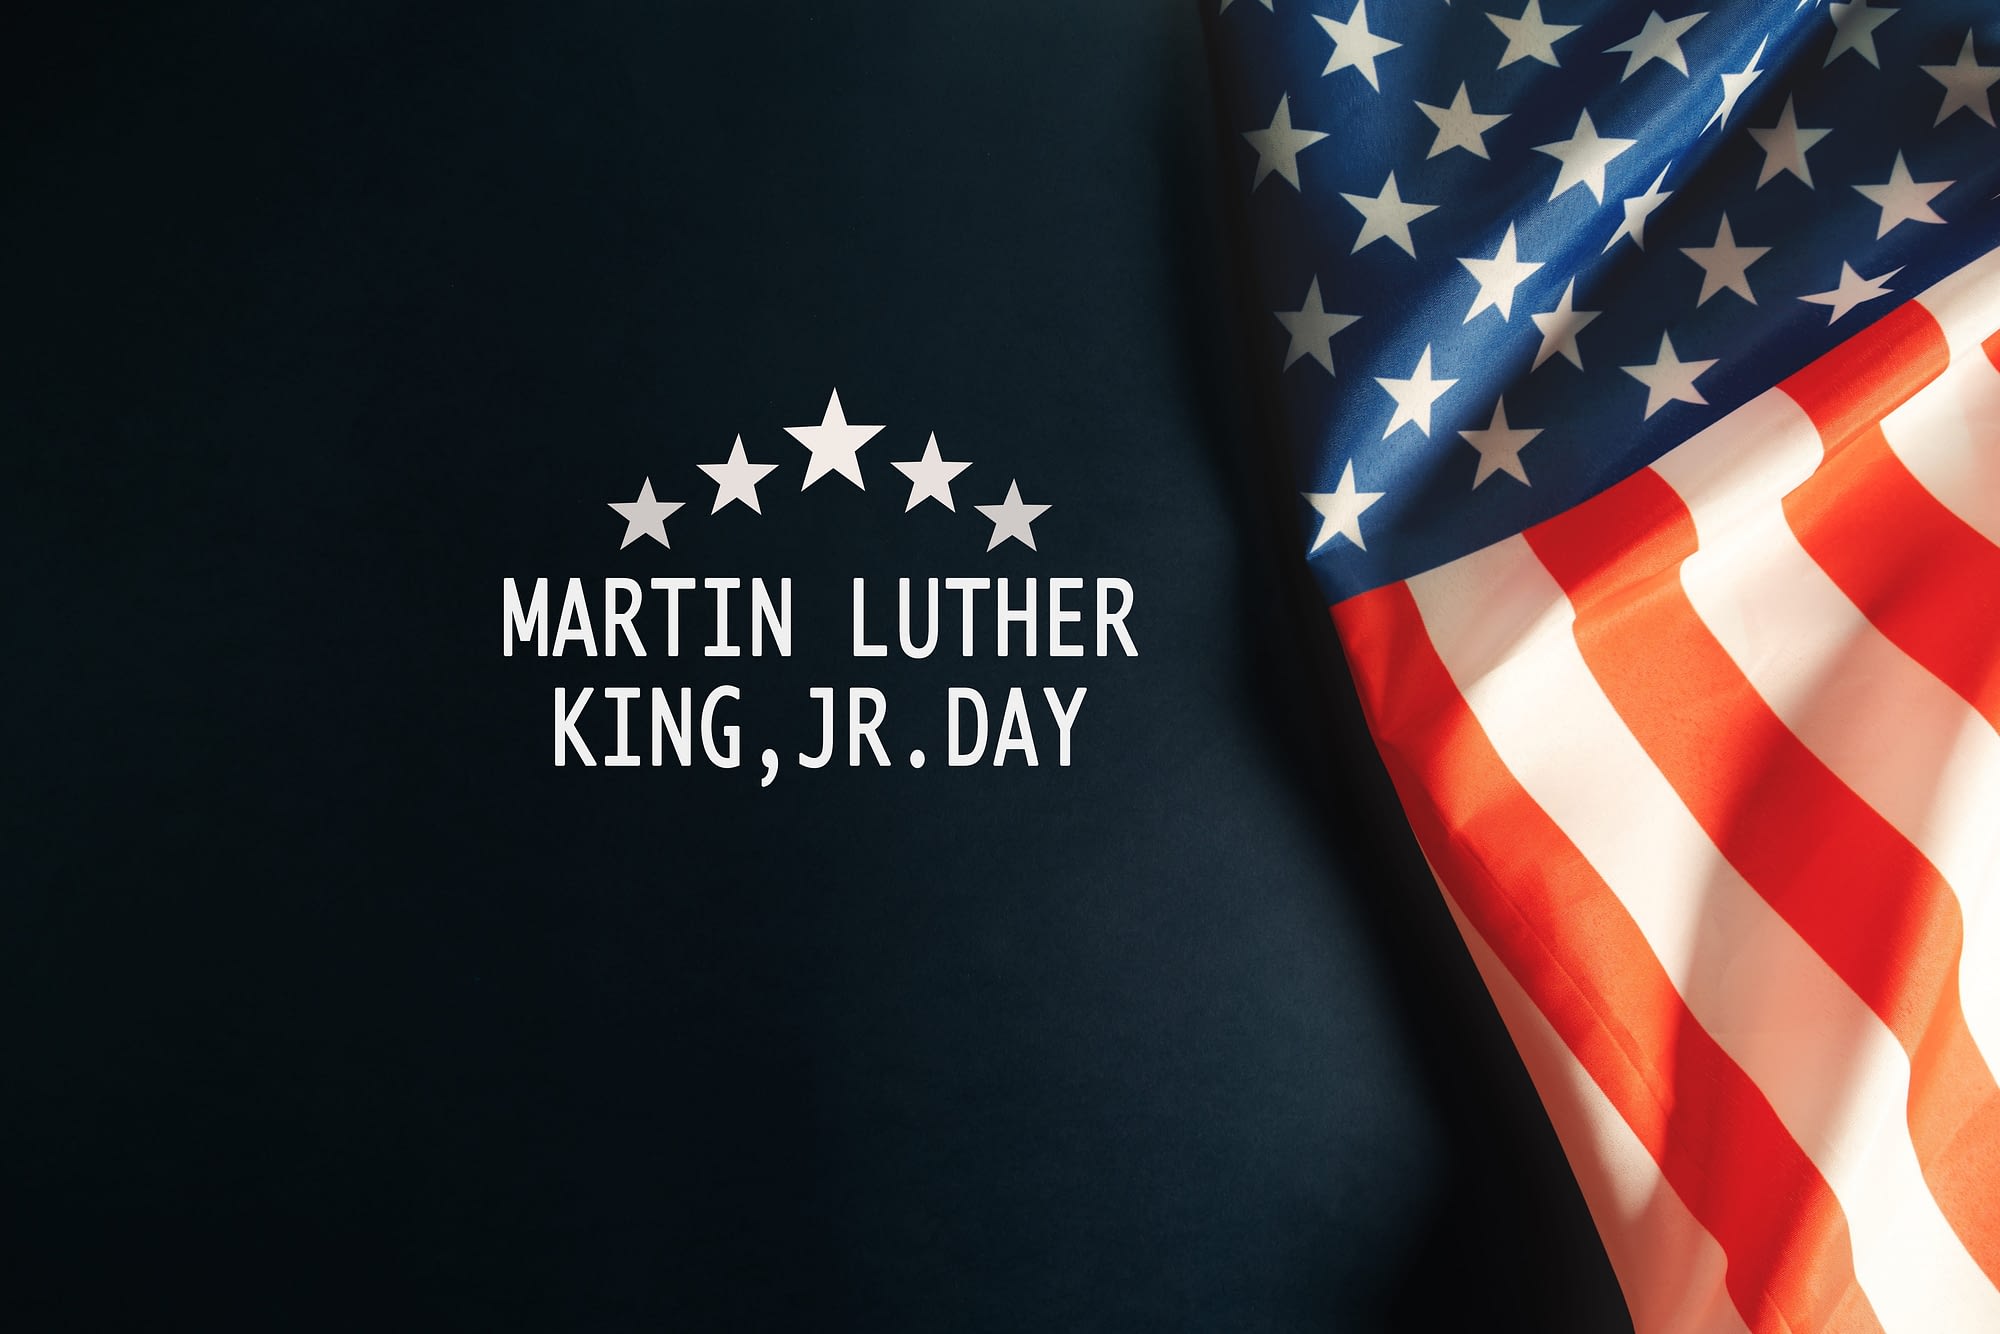 Dr. Martin Luther King Jr. Day